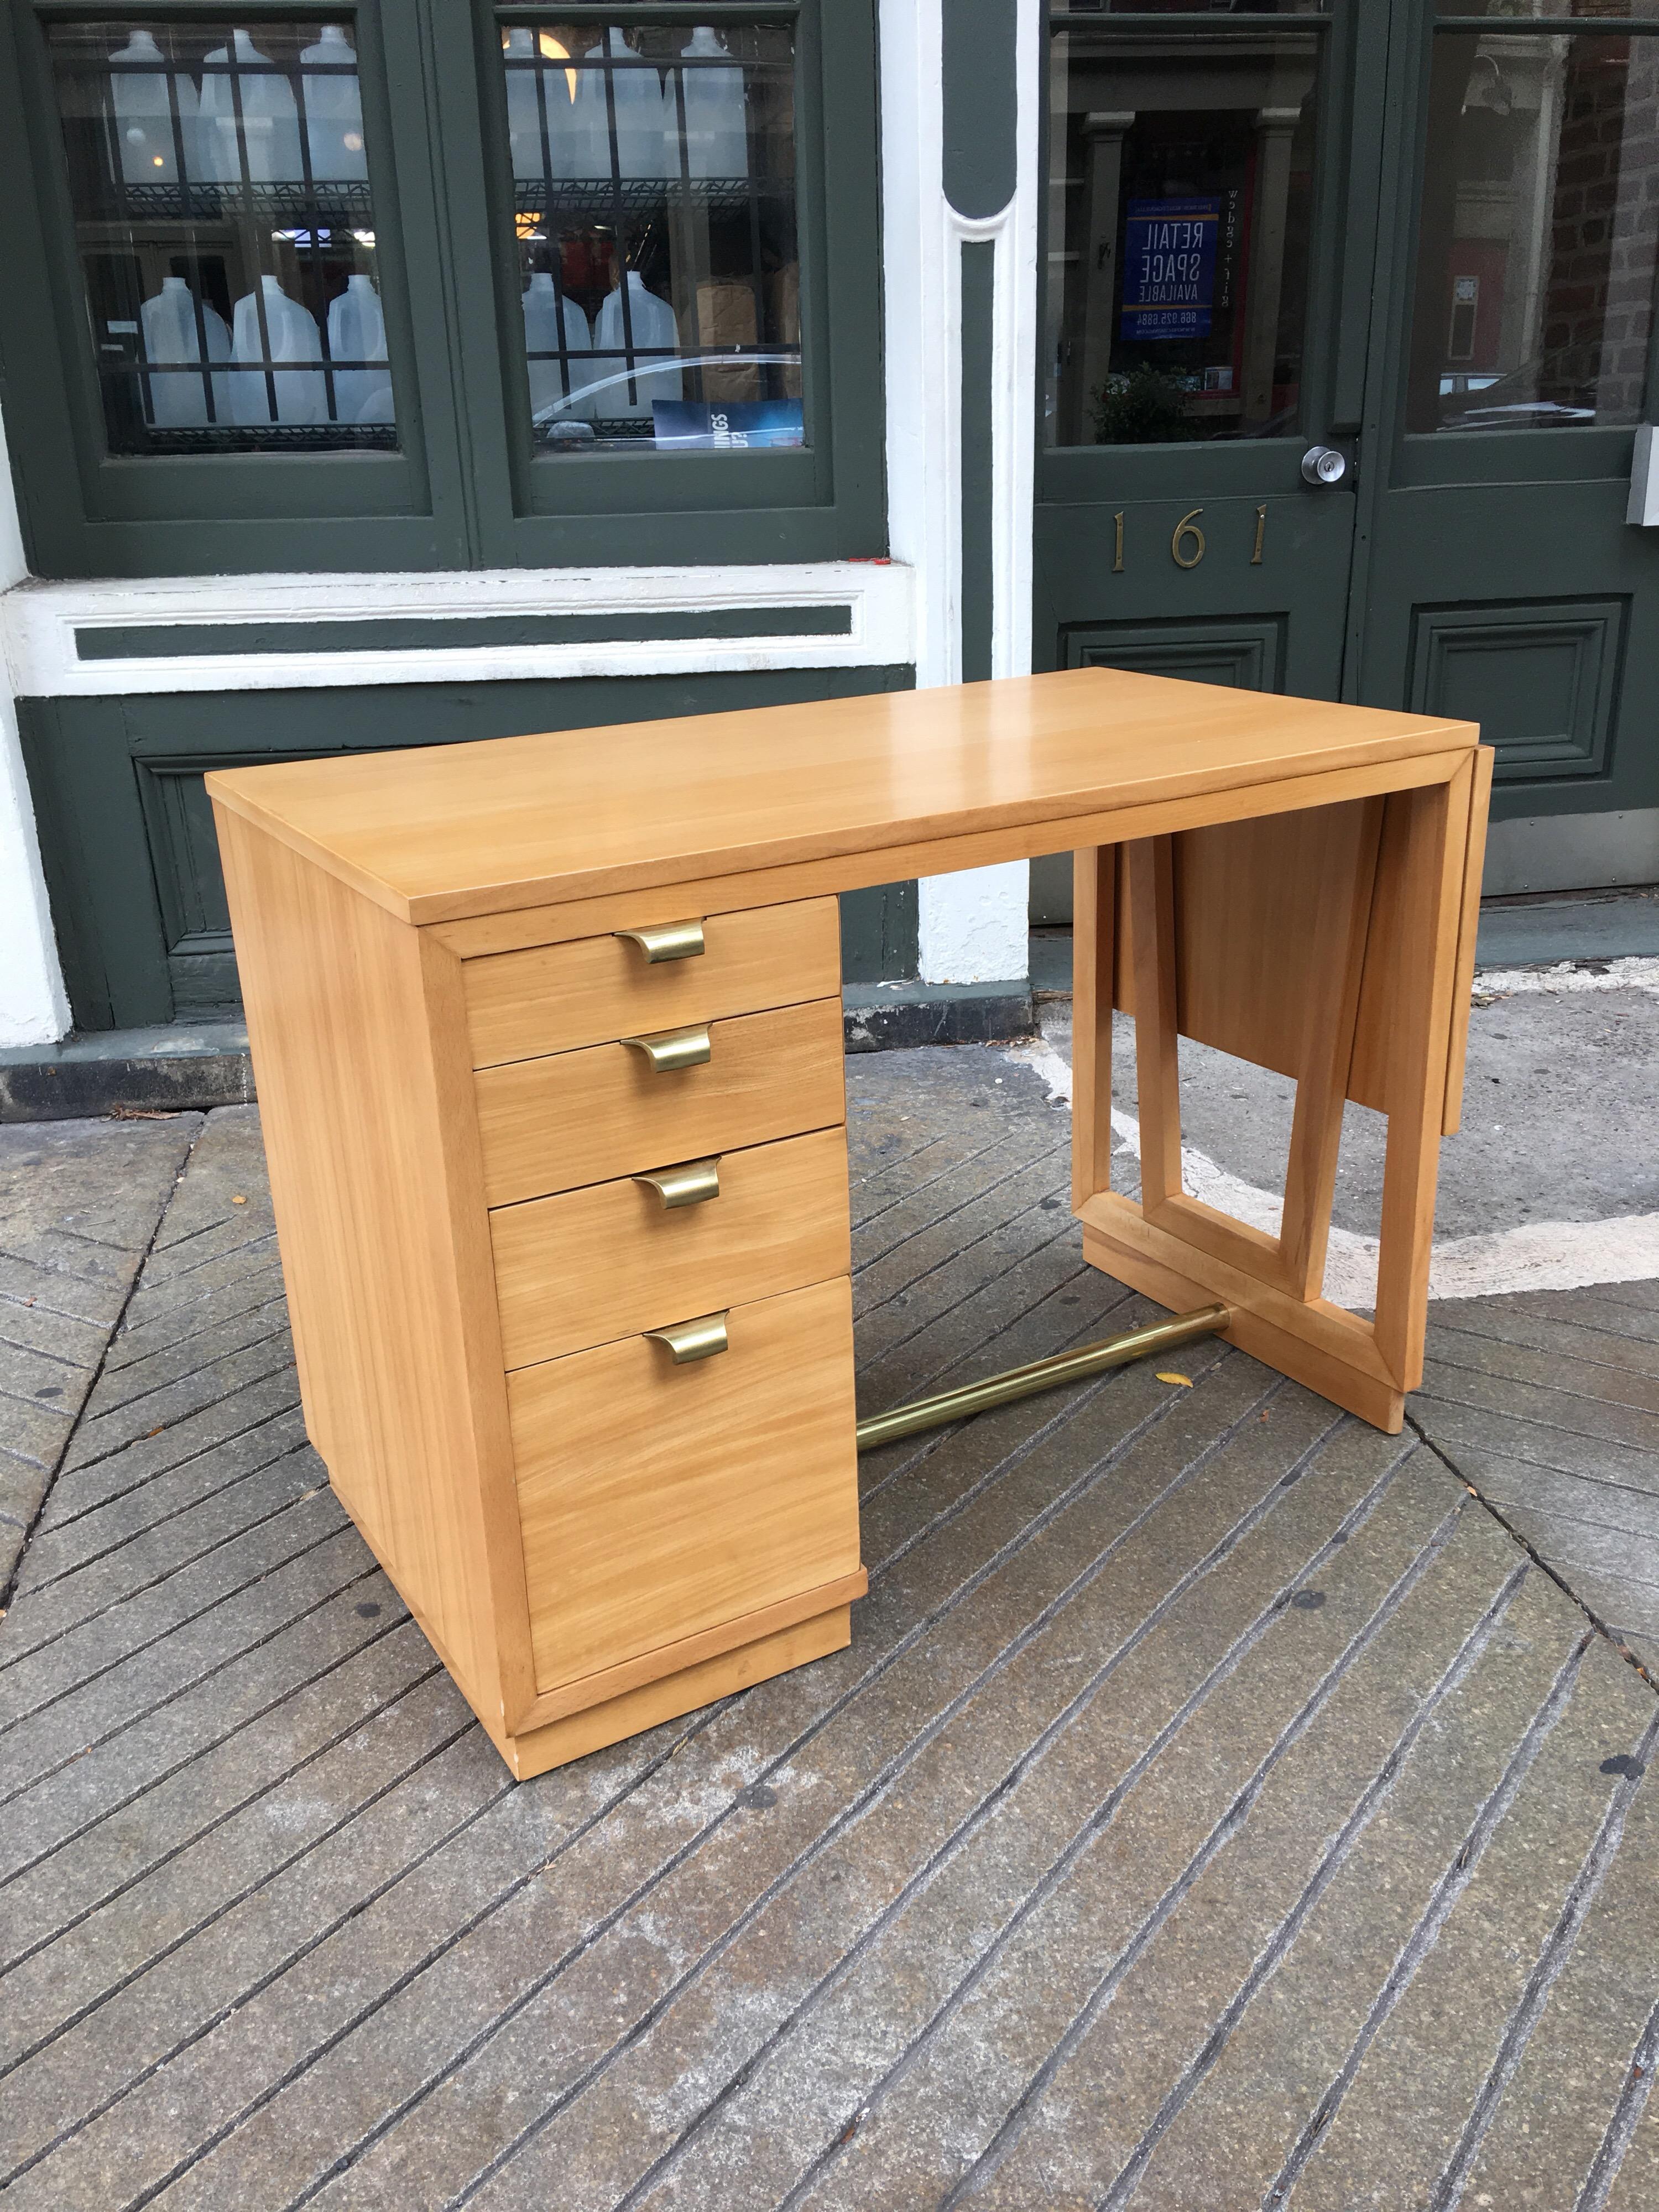 Edward Wormley for Drexel Precedent collection drop-leaf desk in silver elm. Completely redone and ready to go! Fold up leaf adds additional work surface. Brass polished handles add a nice compliment to the light finish. Uncommon form from this